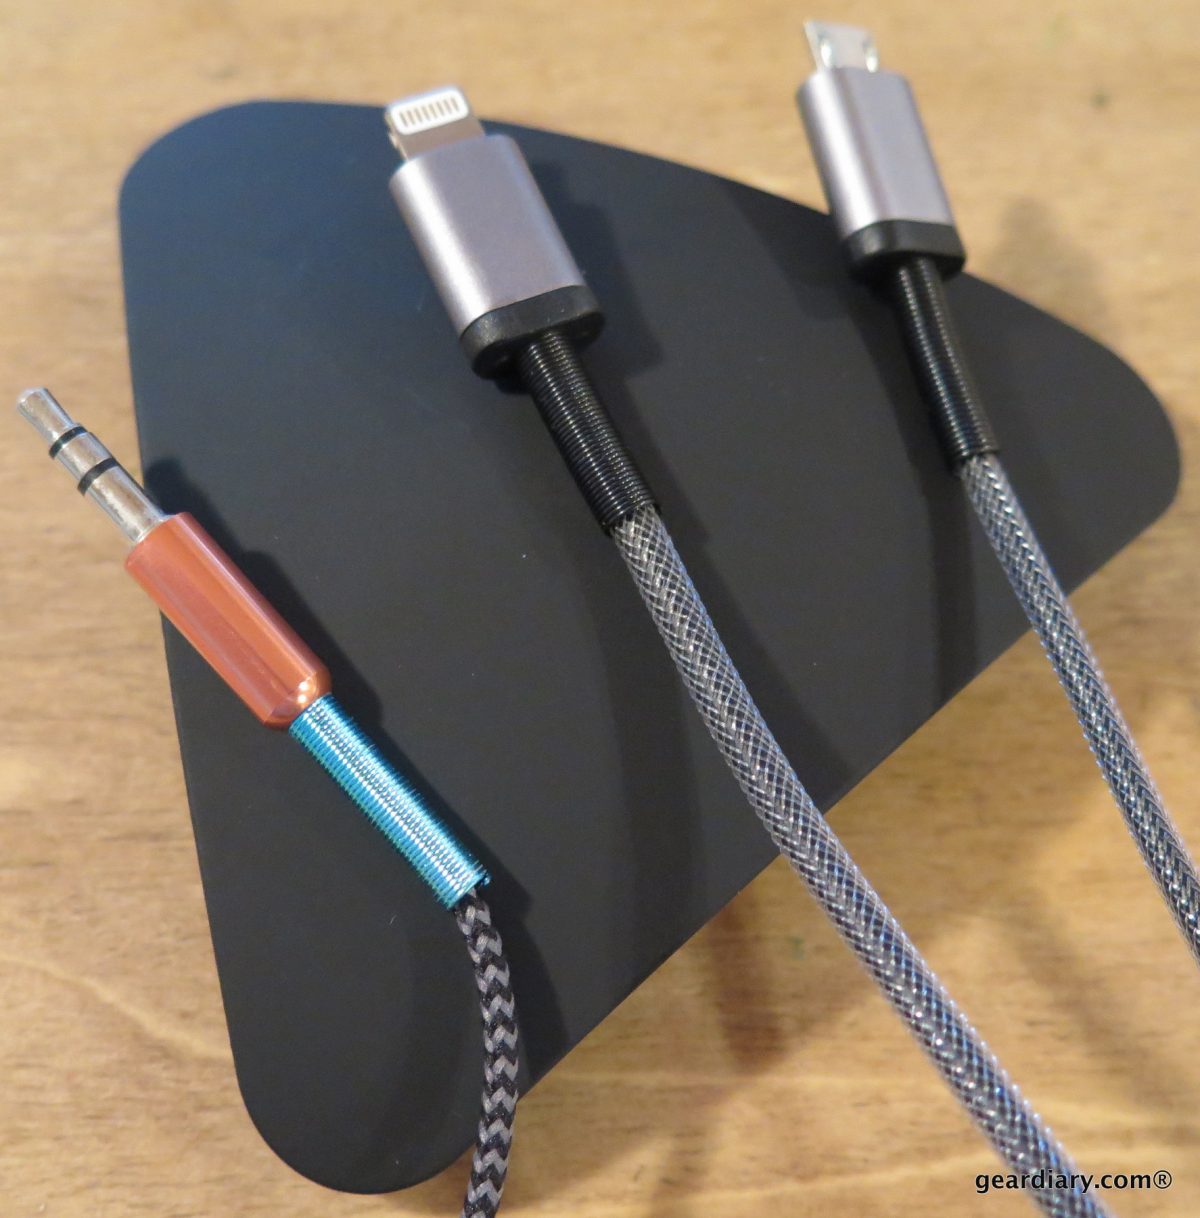 Magnetic Organizational System (MOS) Review: Fab Cables That Stay in Place